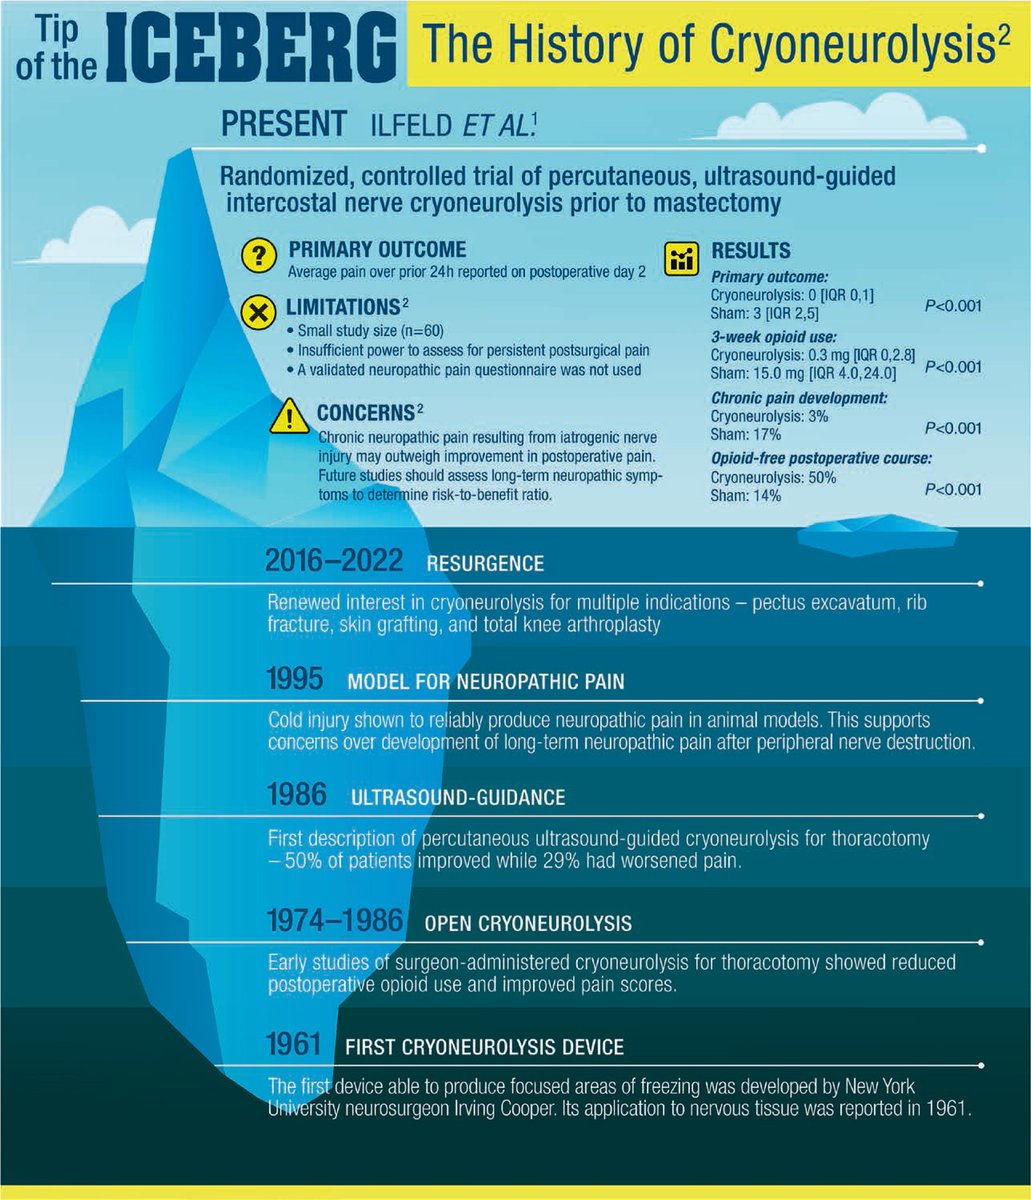 #Infographic in #Anesthesiology - Tip of the Iceberg: The History of Cryoneurolysis 🎨 ow.ly/Rs8R50Po0S5